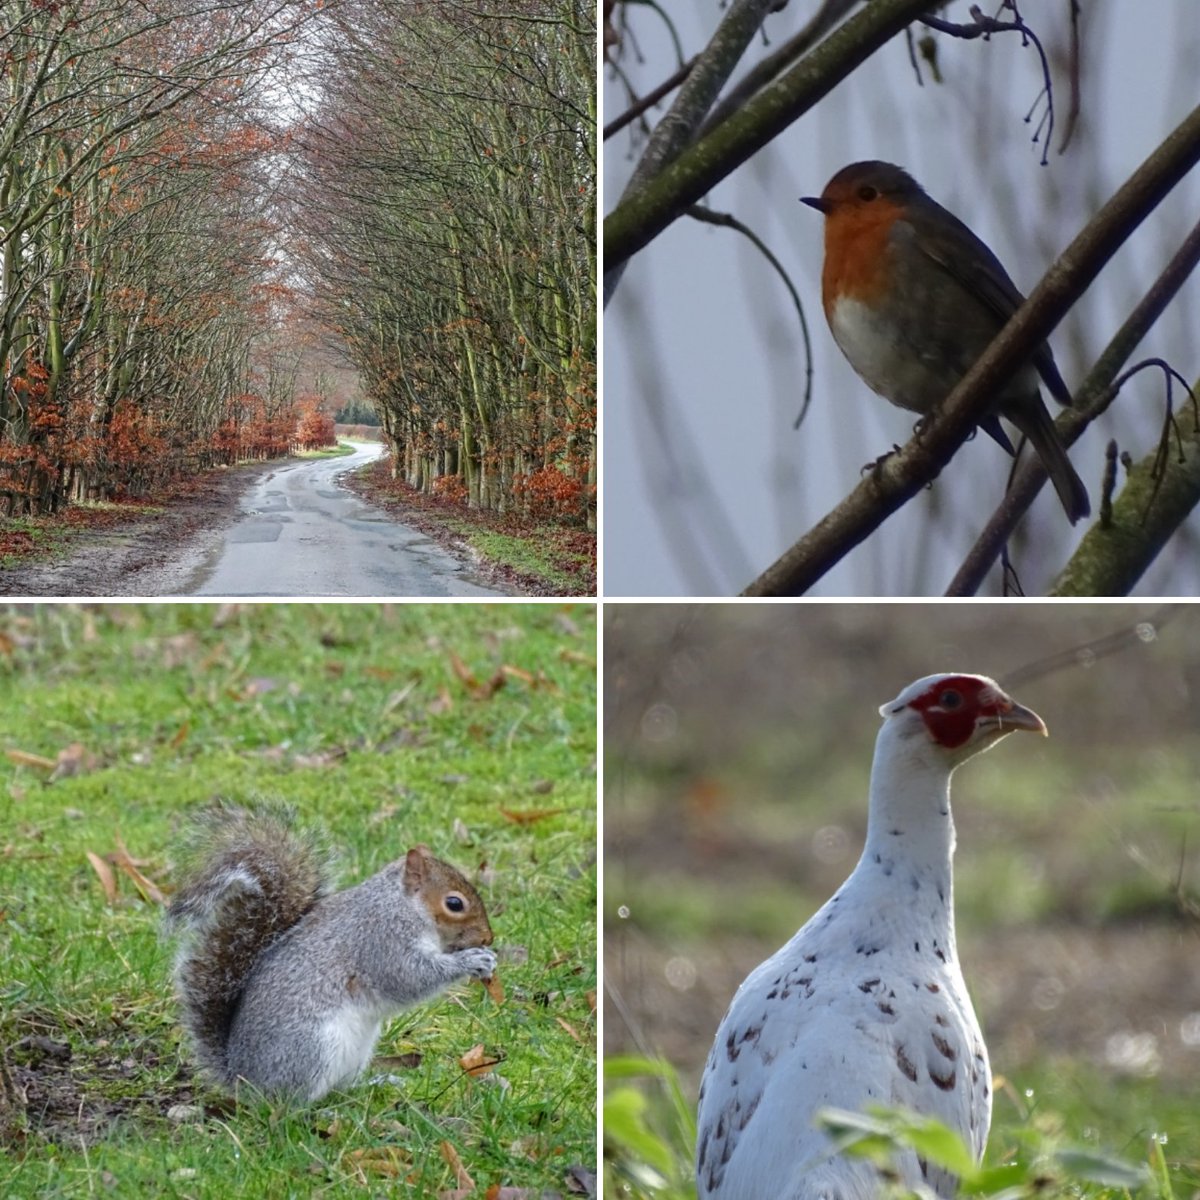 Today's wander around the Yorkshire Wolds 🧡💚 #wolds #yorkshirewolds #robin #squirrel #pheasant #nature #naturelover #wildlife #wildlifephotographer #countryside #rurallife #winter #january #eastriding #eastridingofyorkshire #lovewhereyoulive